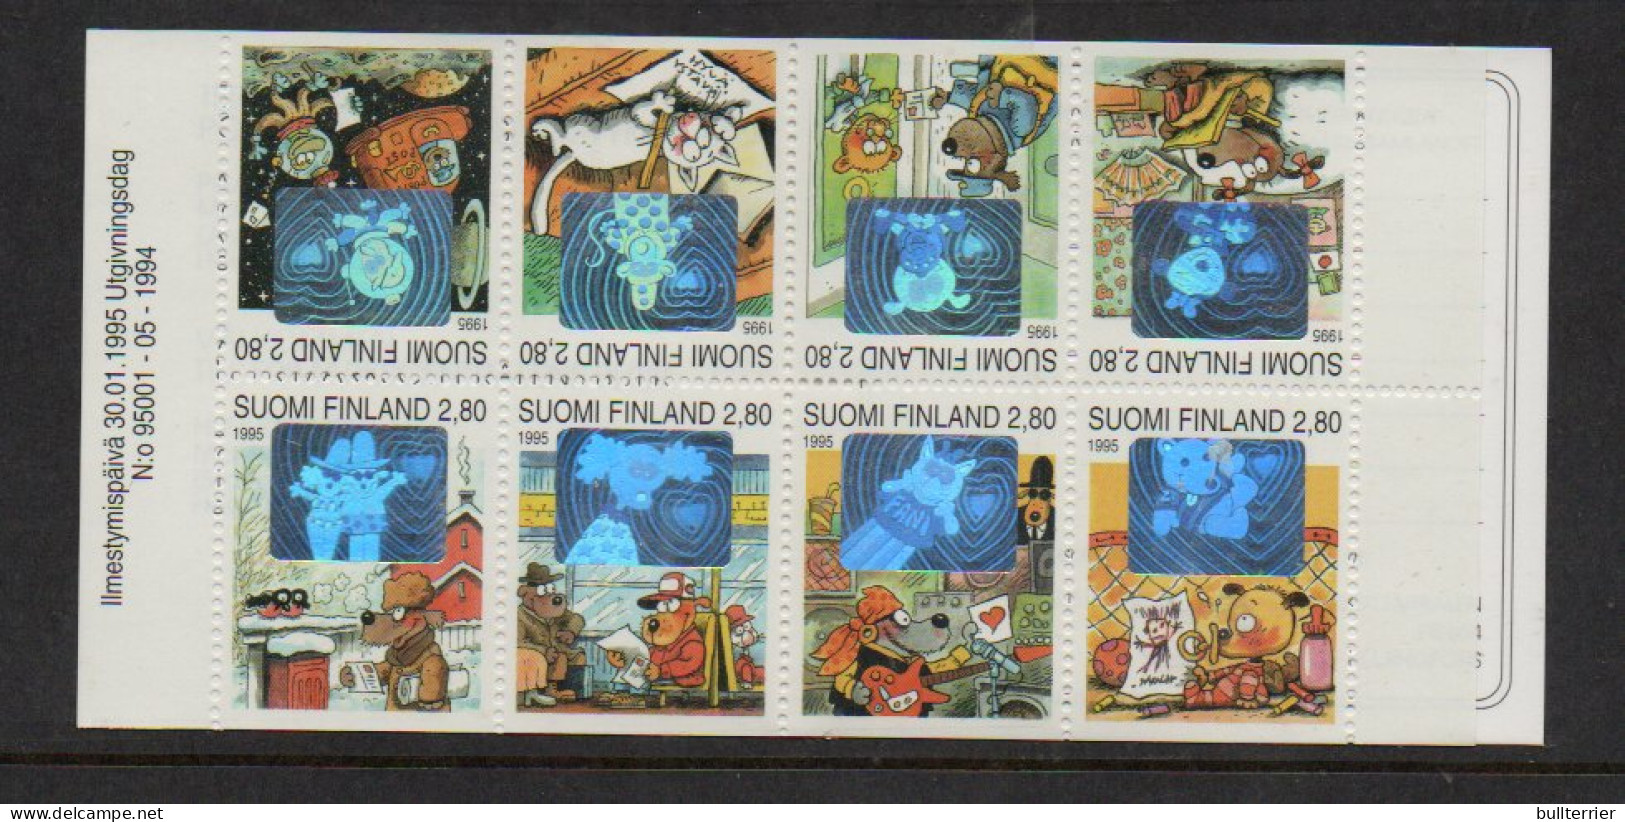 FINLAND - 1995 GREETINGS HOLOGRAM STAMPS BOOKLET COMPLET  MINT NEVER HINGED  SG CAT £20 - Nuovi